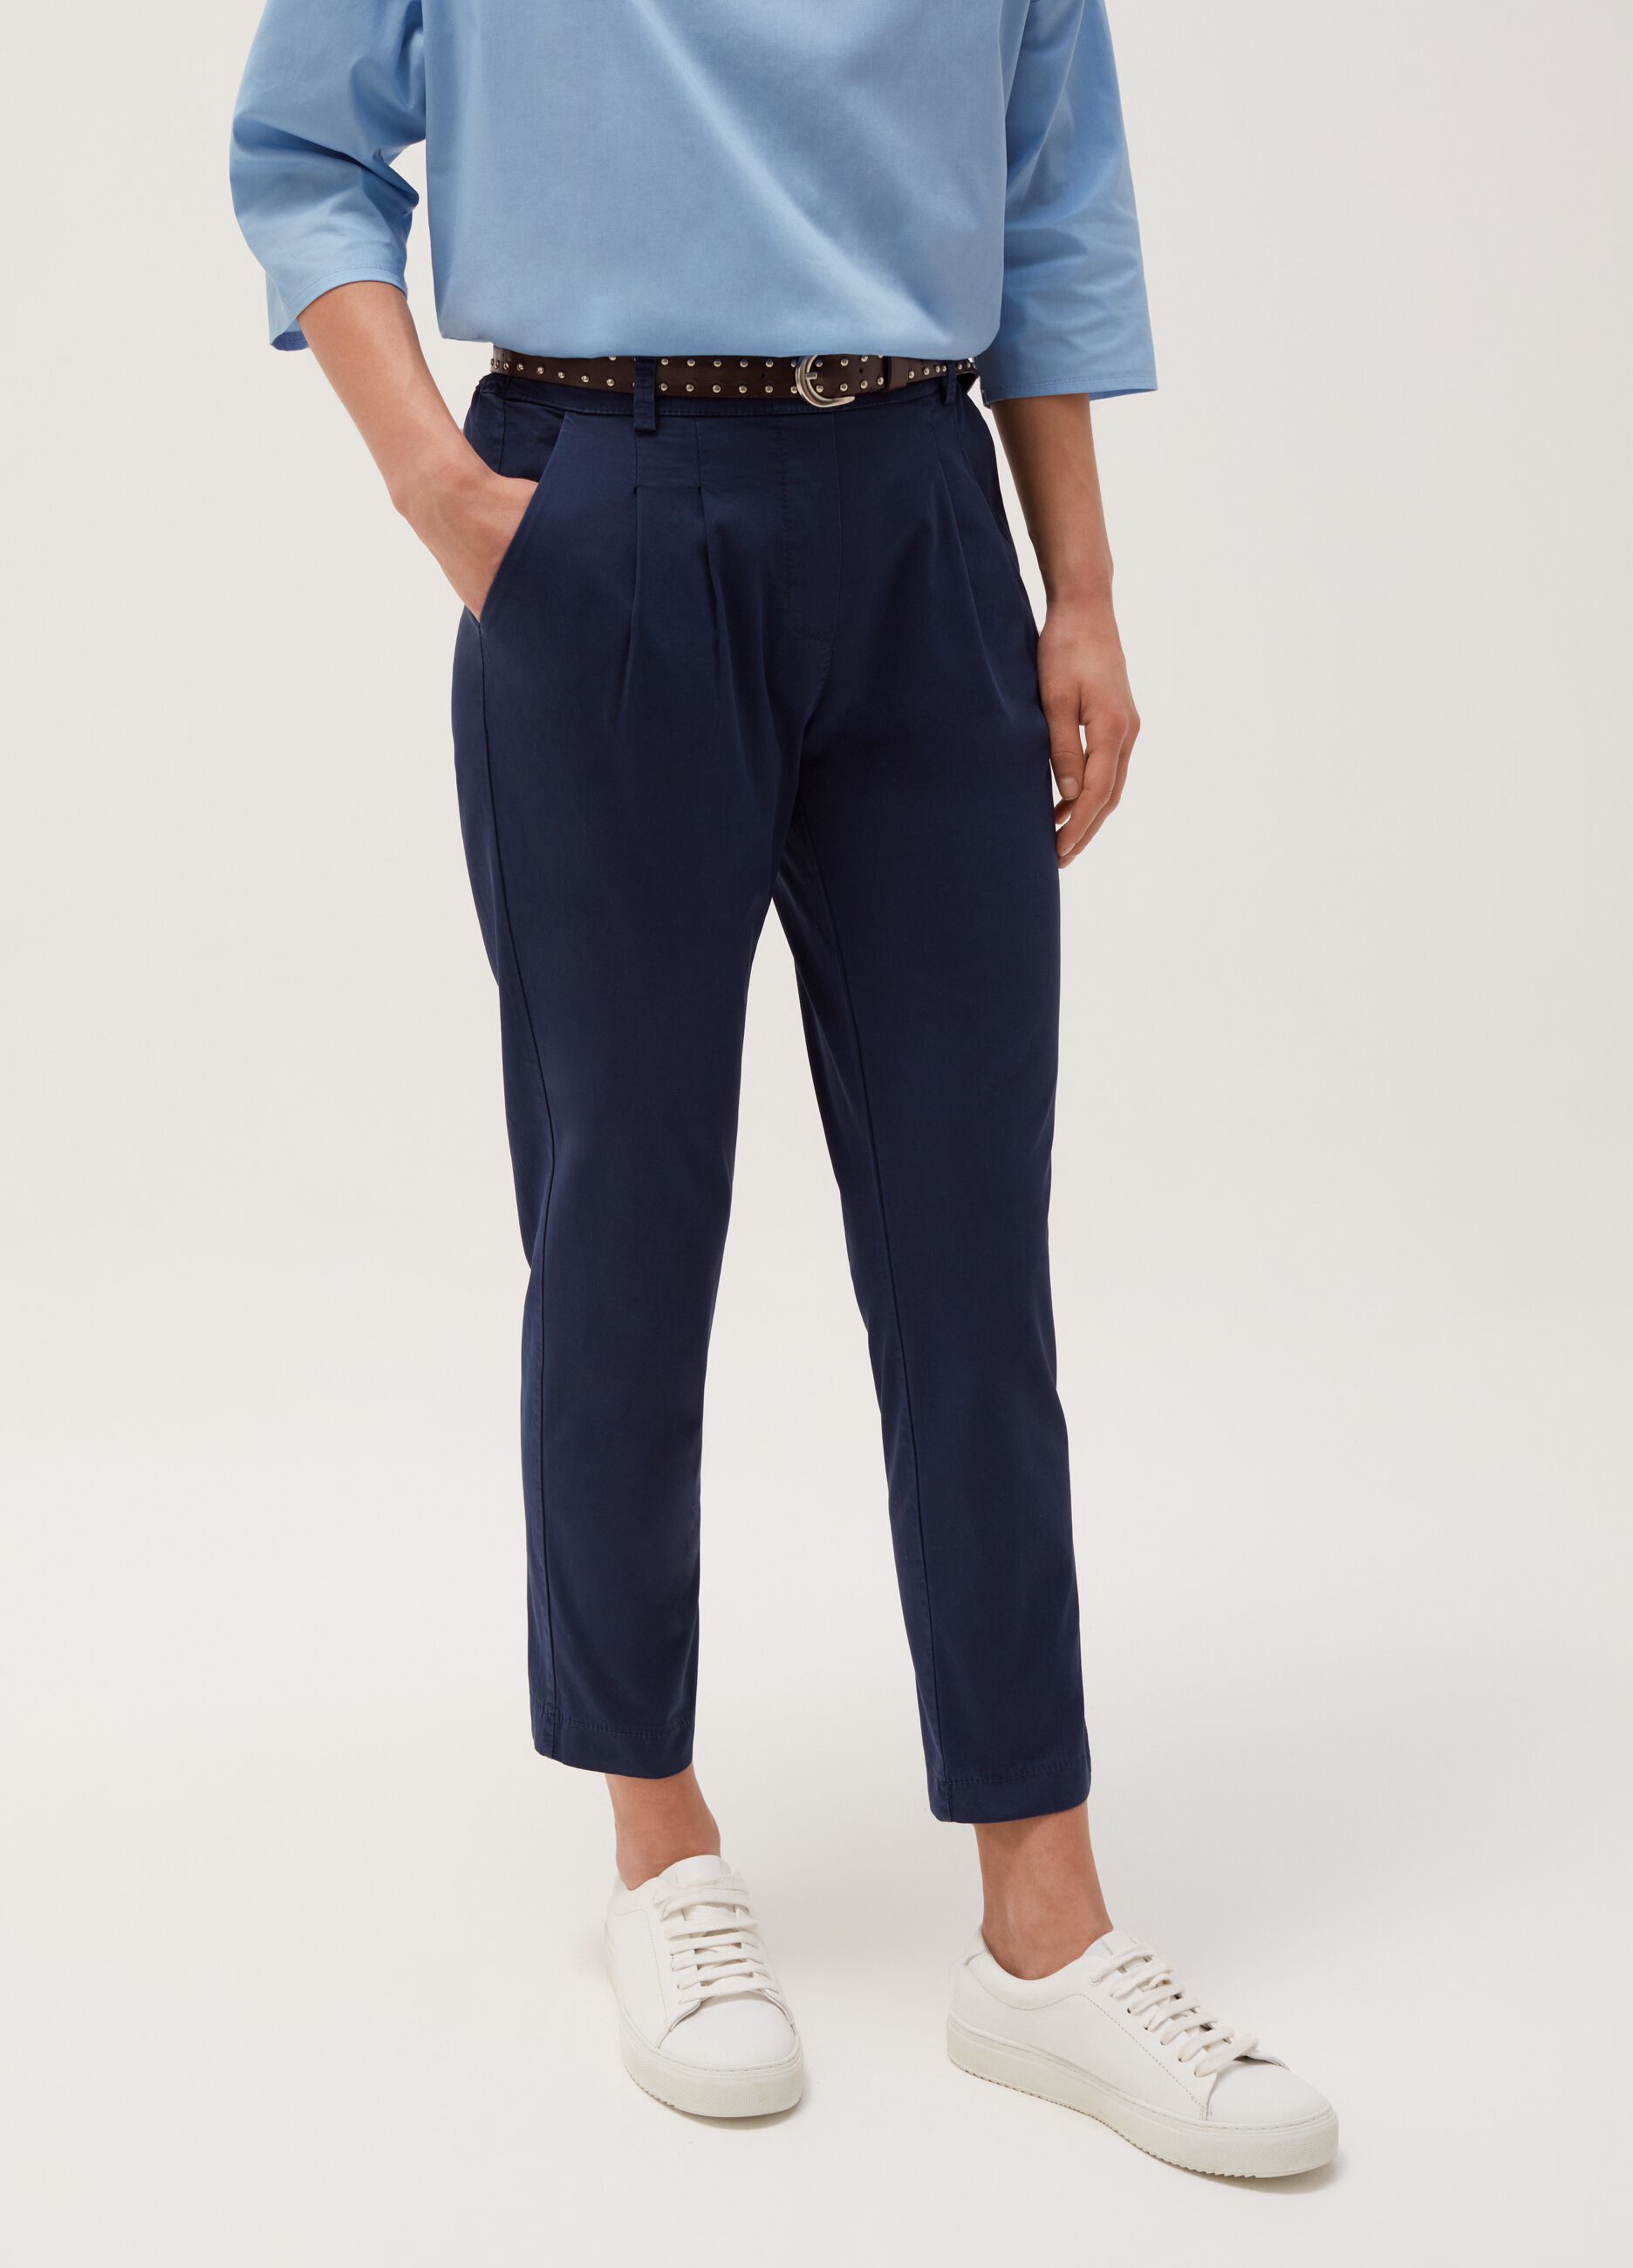 Hybrid cigarette trousers with belt